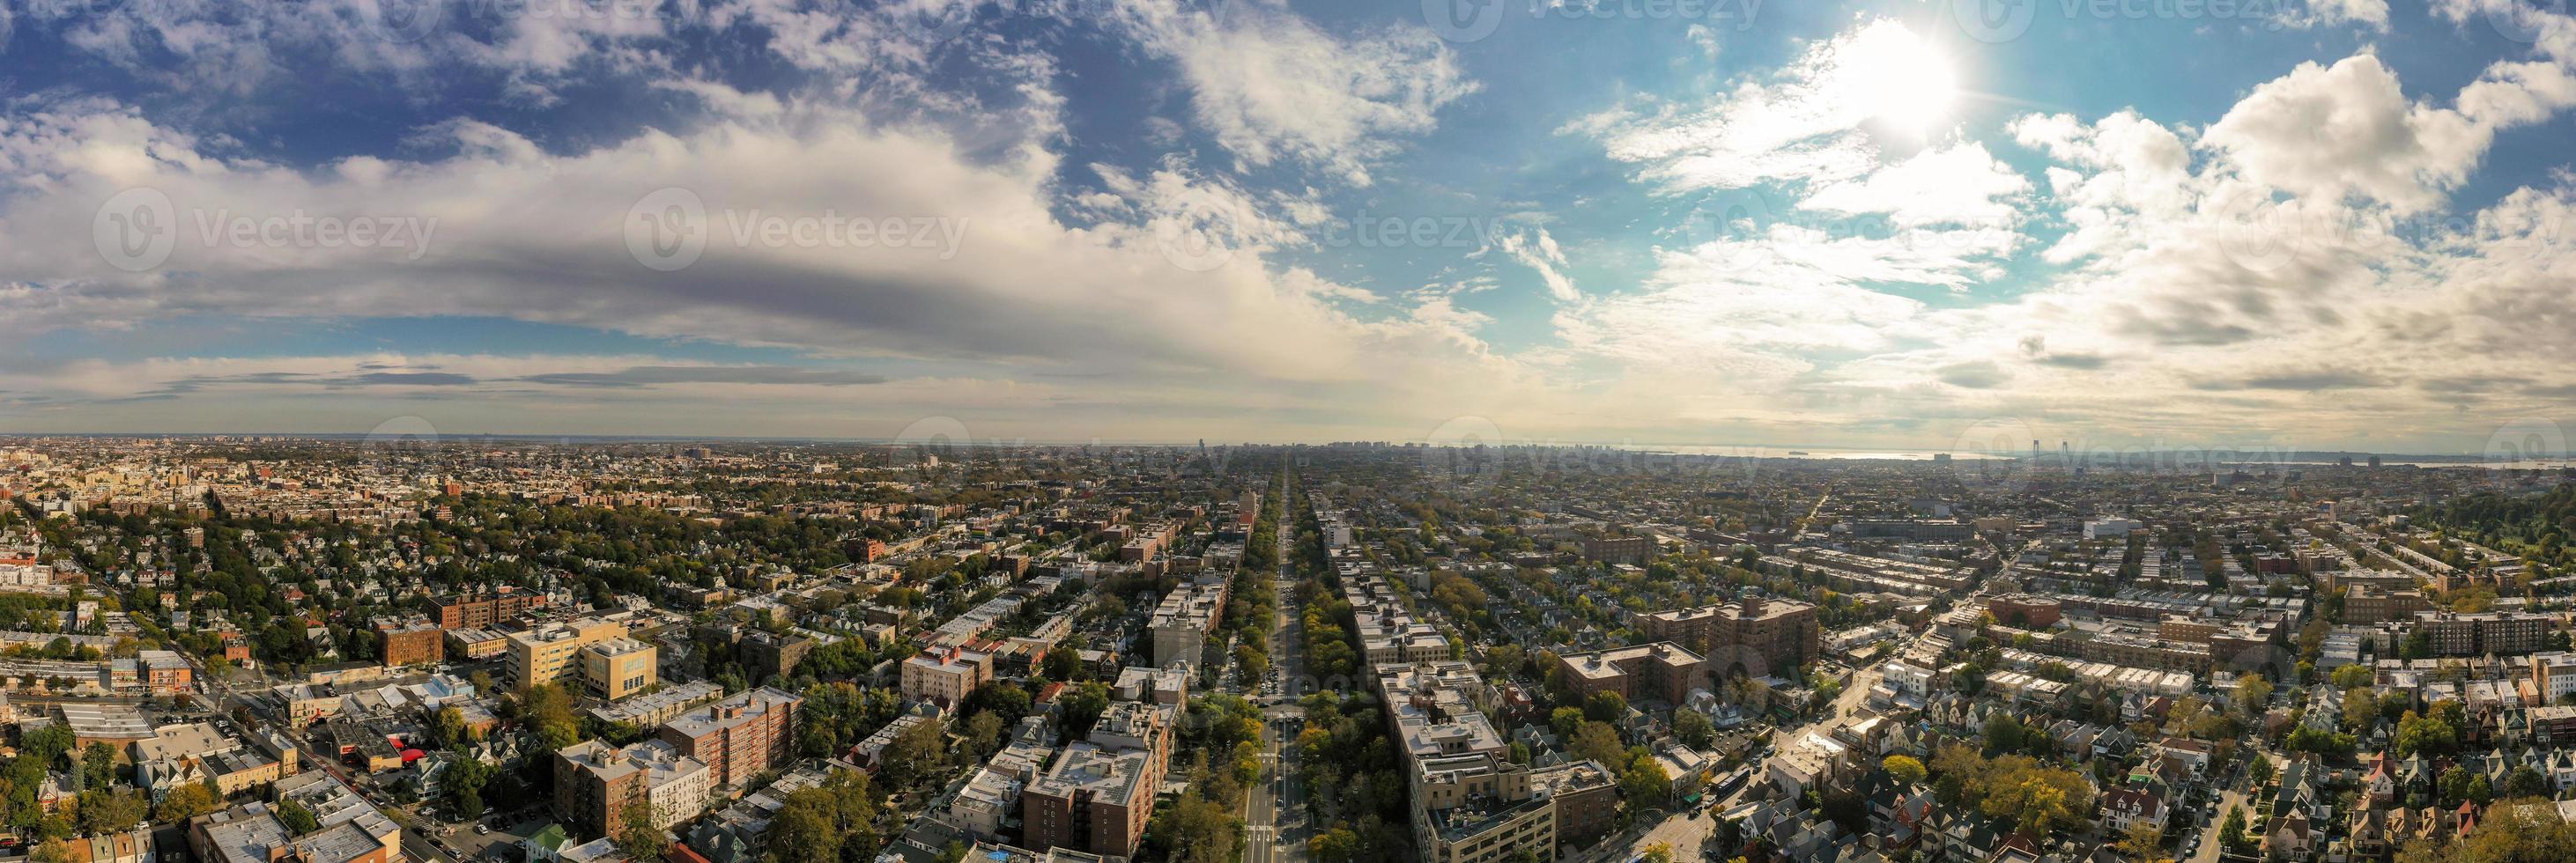 Panoramic view of Southern Brooklyn from Kensington in New York City photo